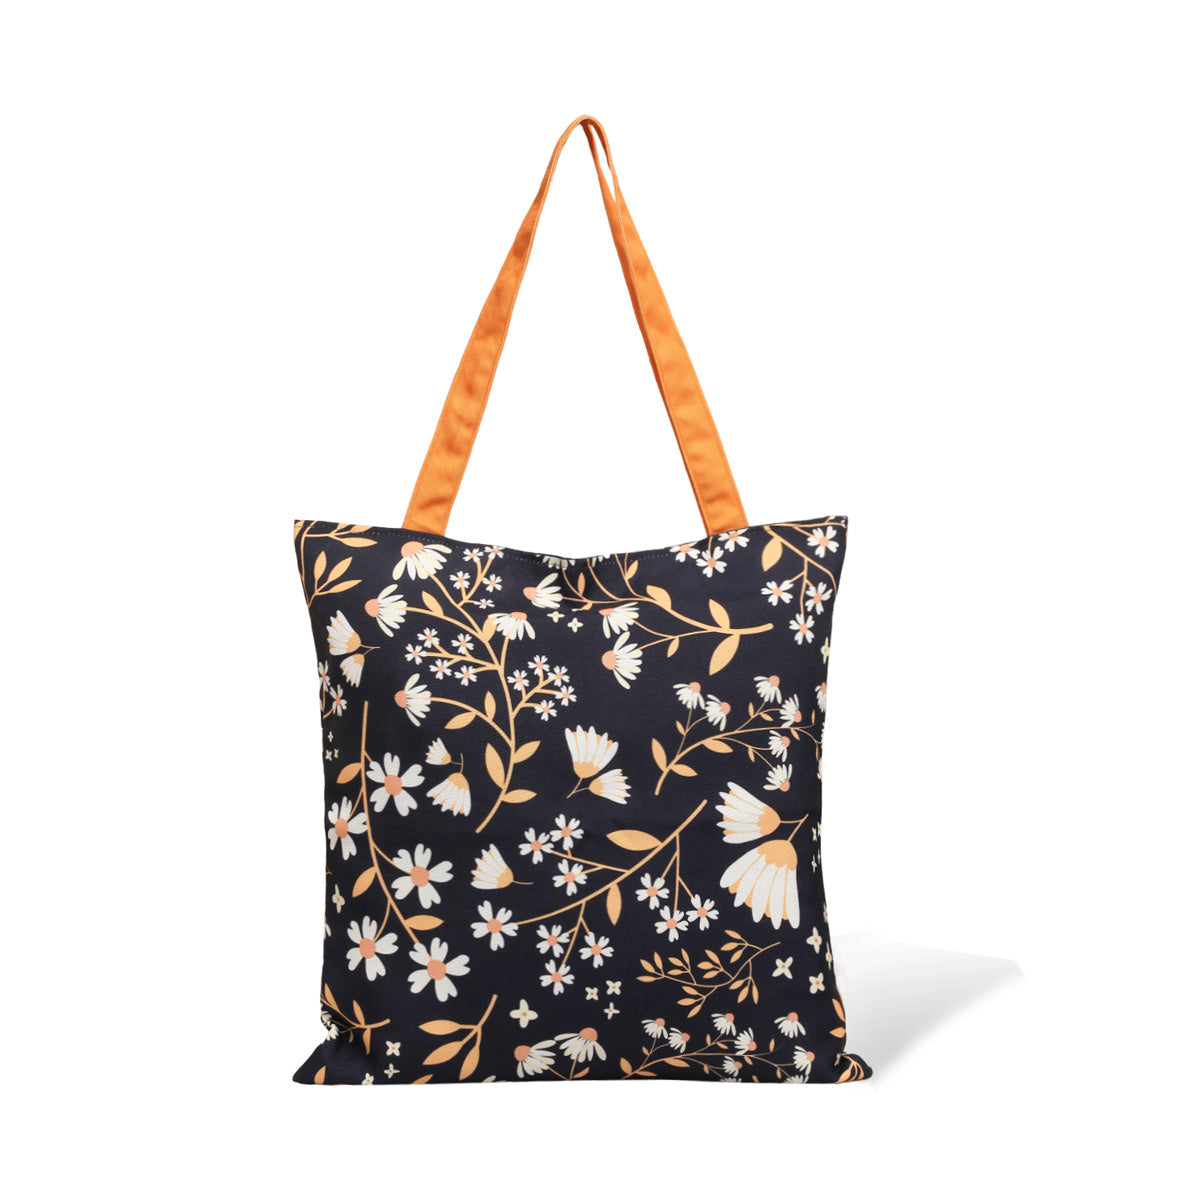 A navy blue tote bag with orange straps and a floral print pattern featuring white and yellow flowers with green leaves, isolated on a white background.